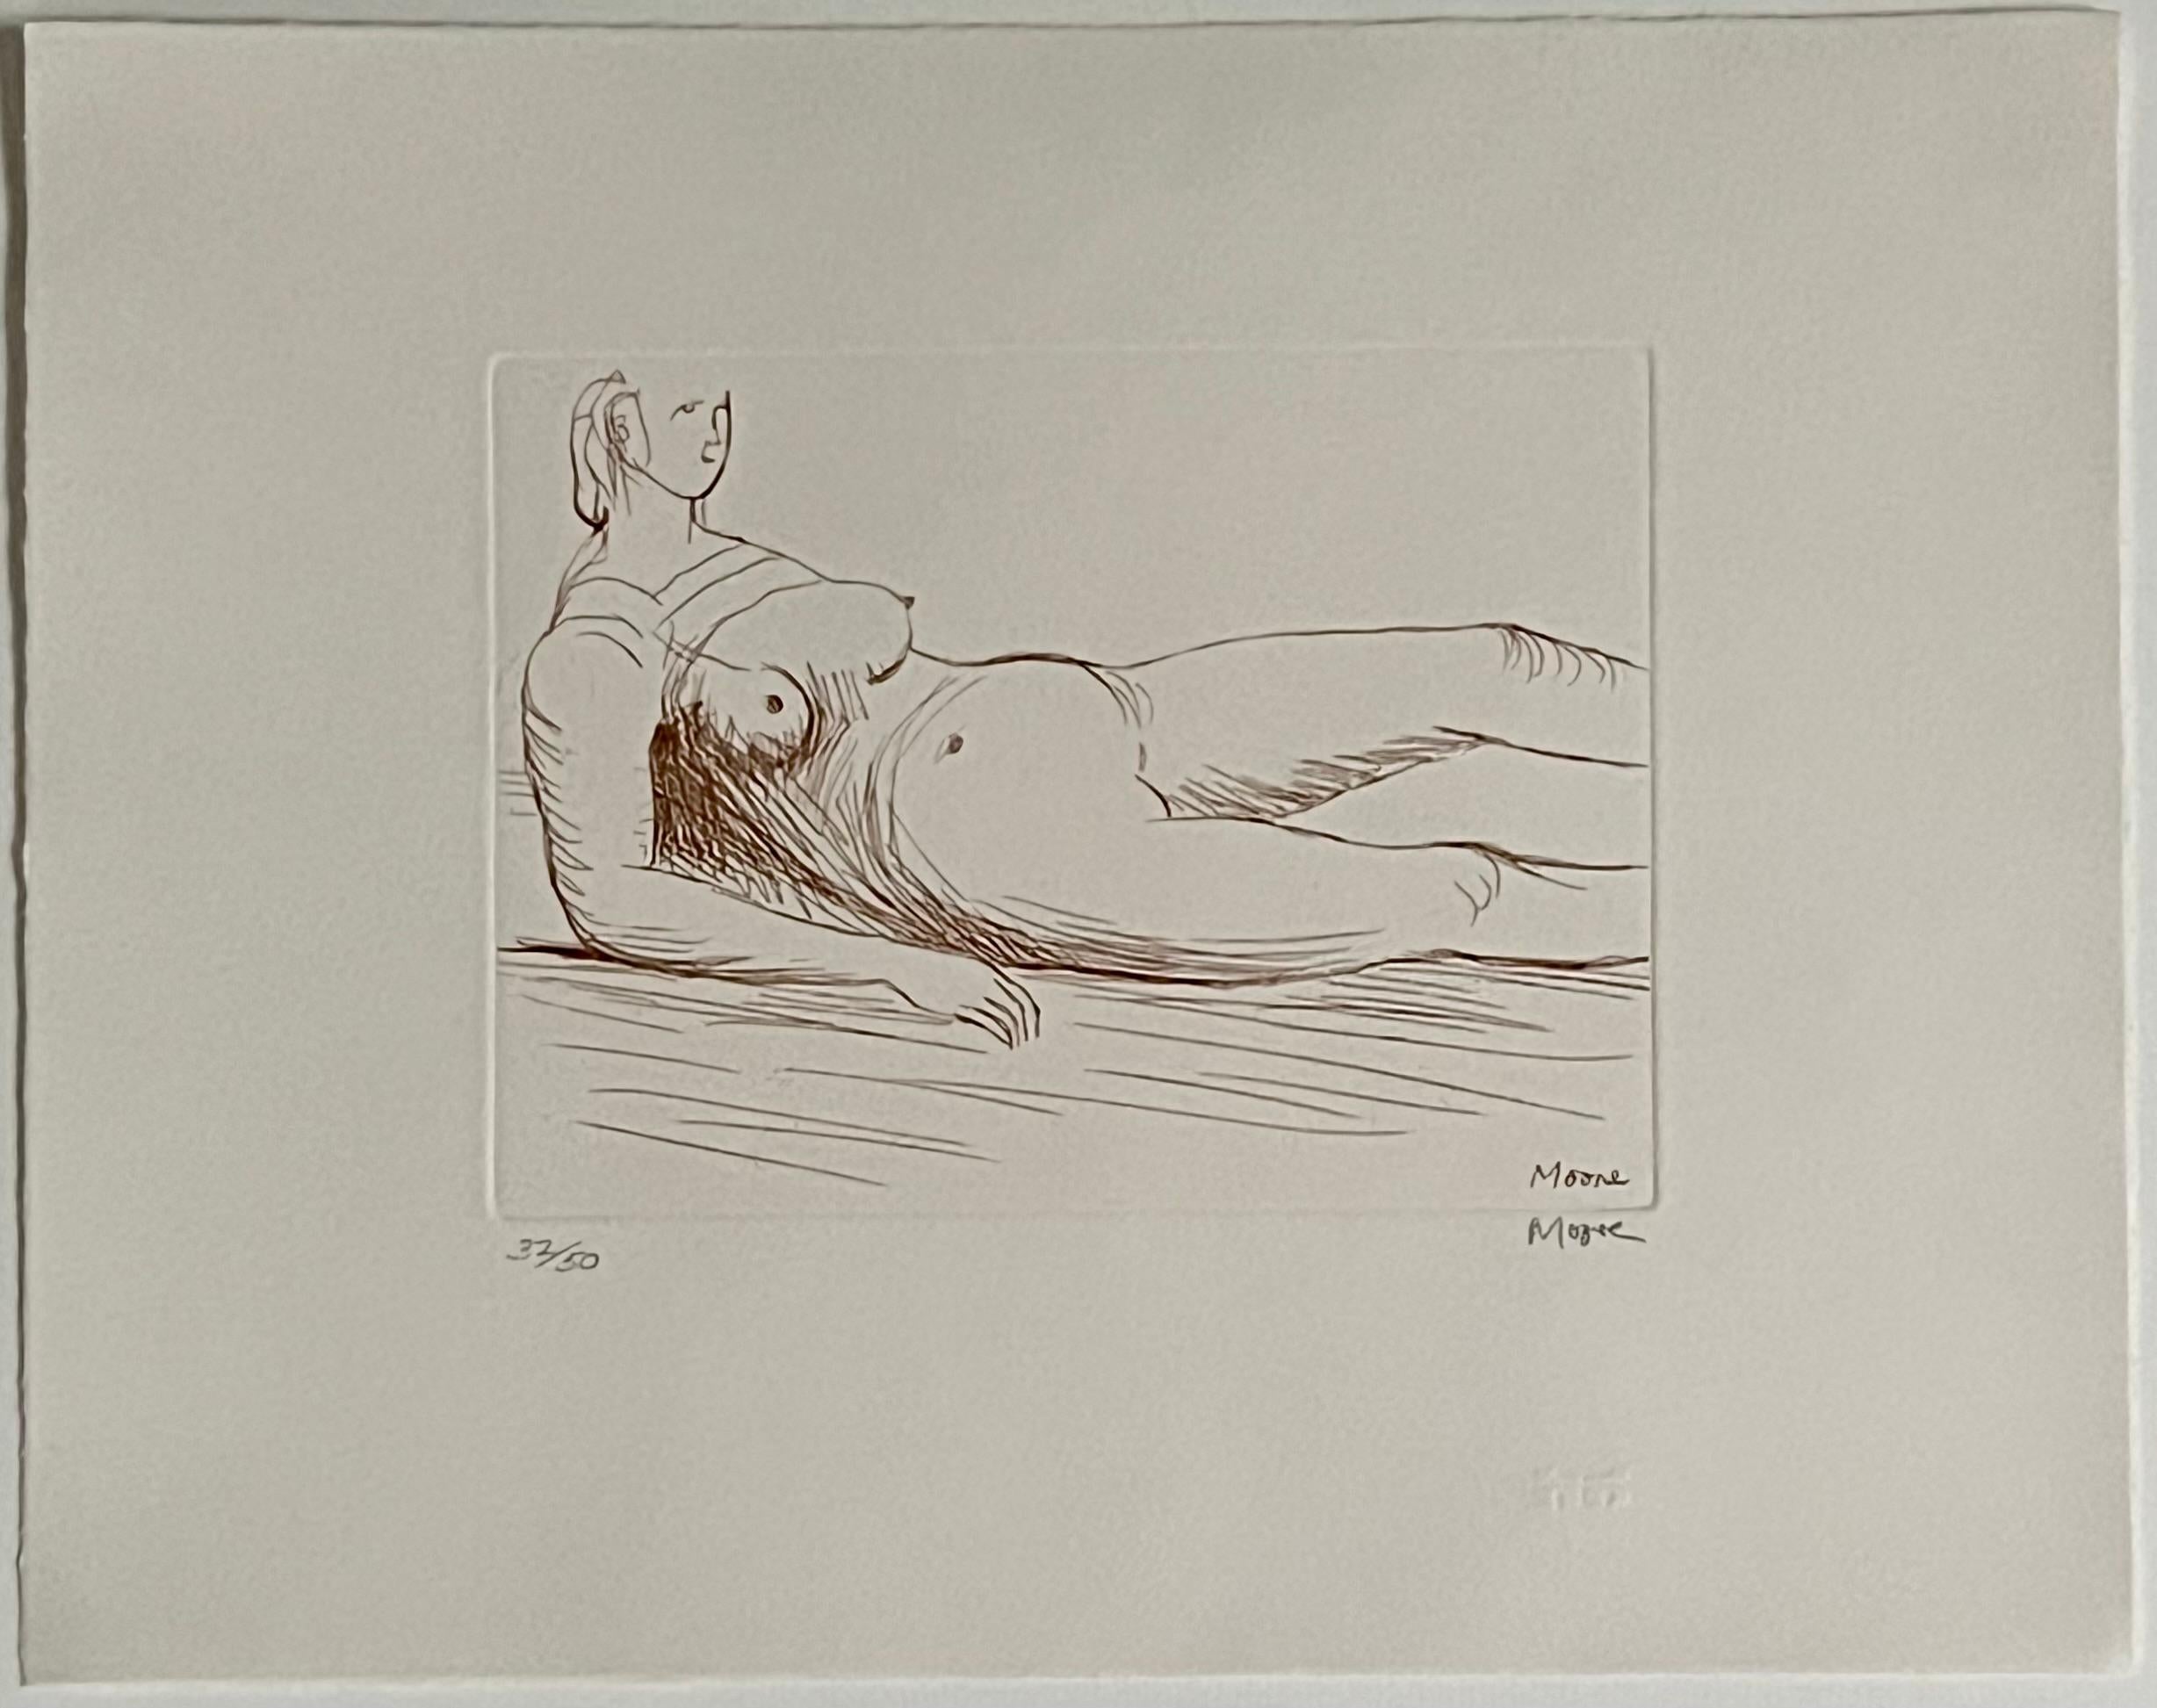 Henry Moore
Reclining Figure
Original etching in sepia, hand signed
1979
Image size: 12 5/8 x 15 7/8 inches
Framed Dimensions: 25 x 25 inches
Numbered 32/50 from the edition of 50 on arches paper
Referenced as #559 in "Henry Moore: The Graphic Work"